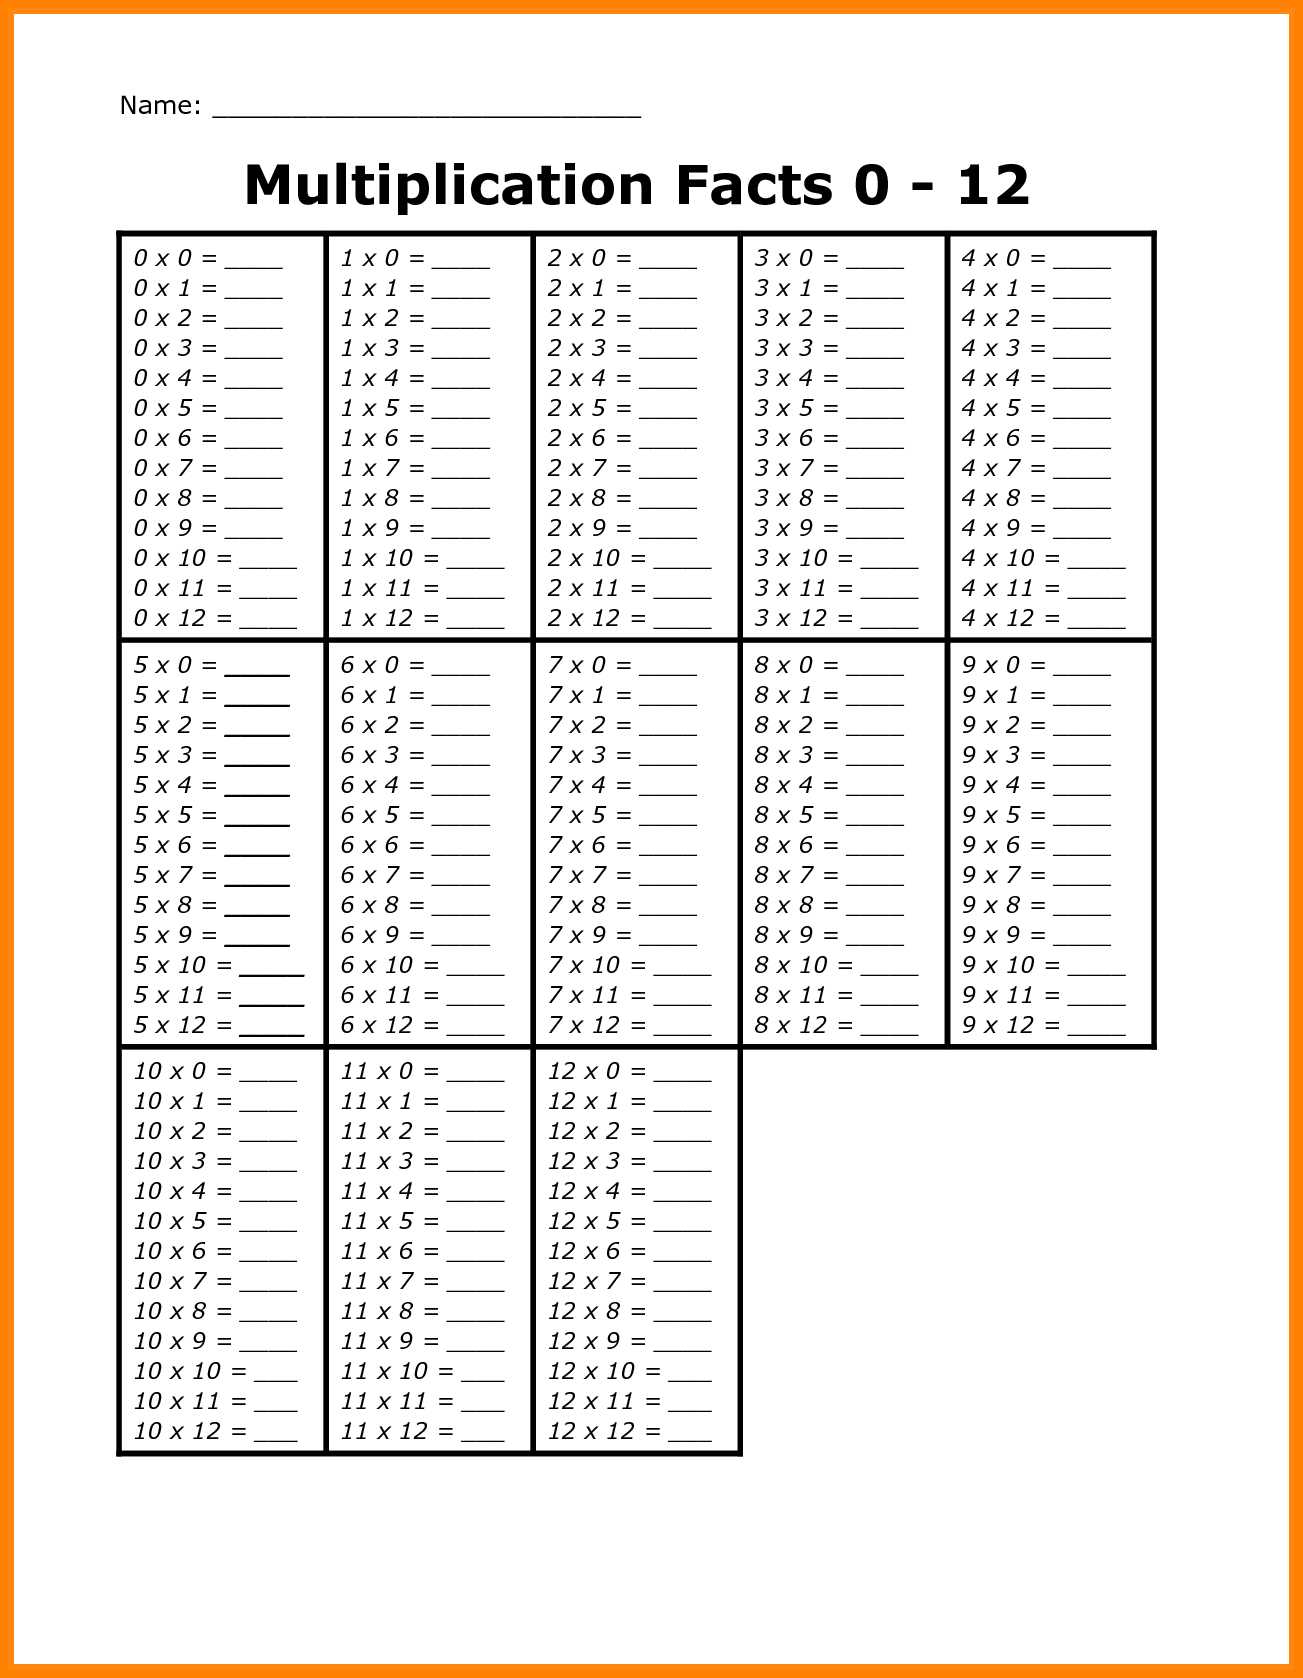 Times Tables Worksheets 1 12 Pdf or Math Facts 1 10 Worksheets Gallery Worksheet Math for Kids